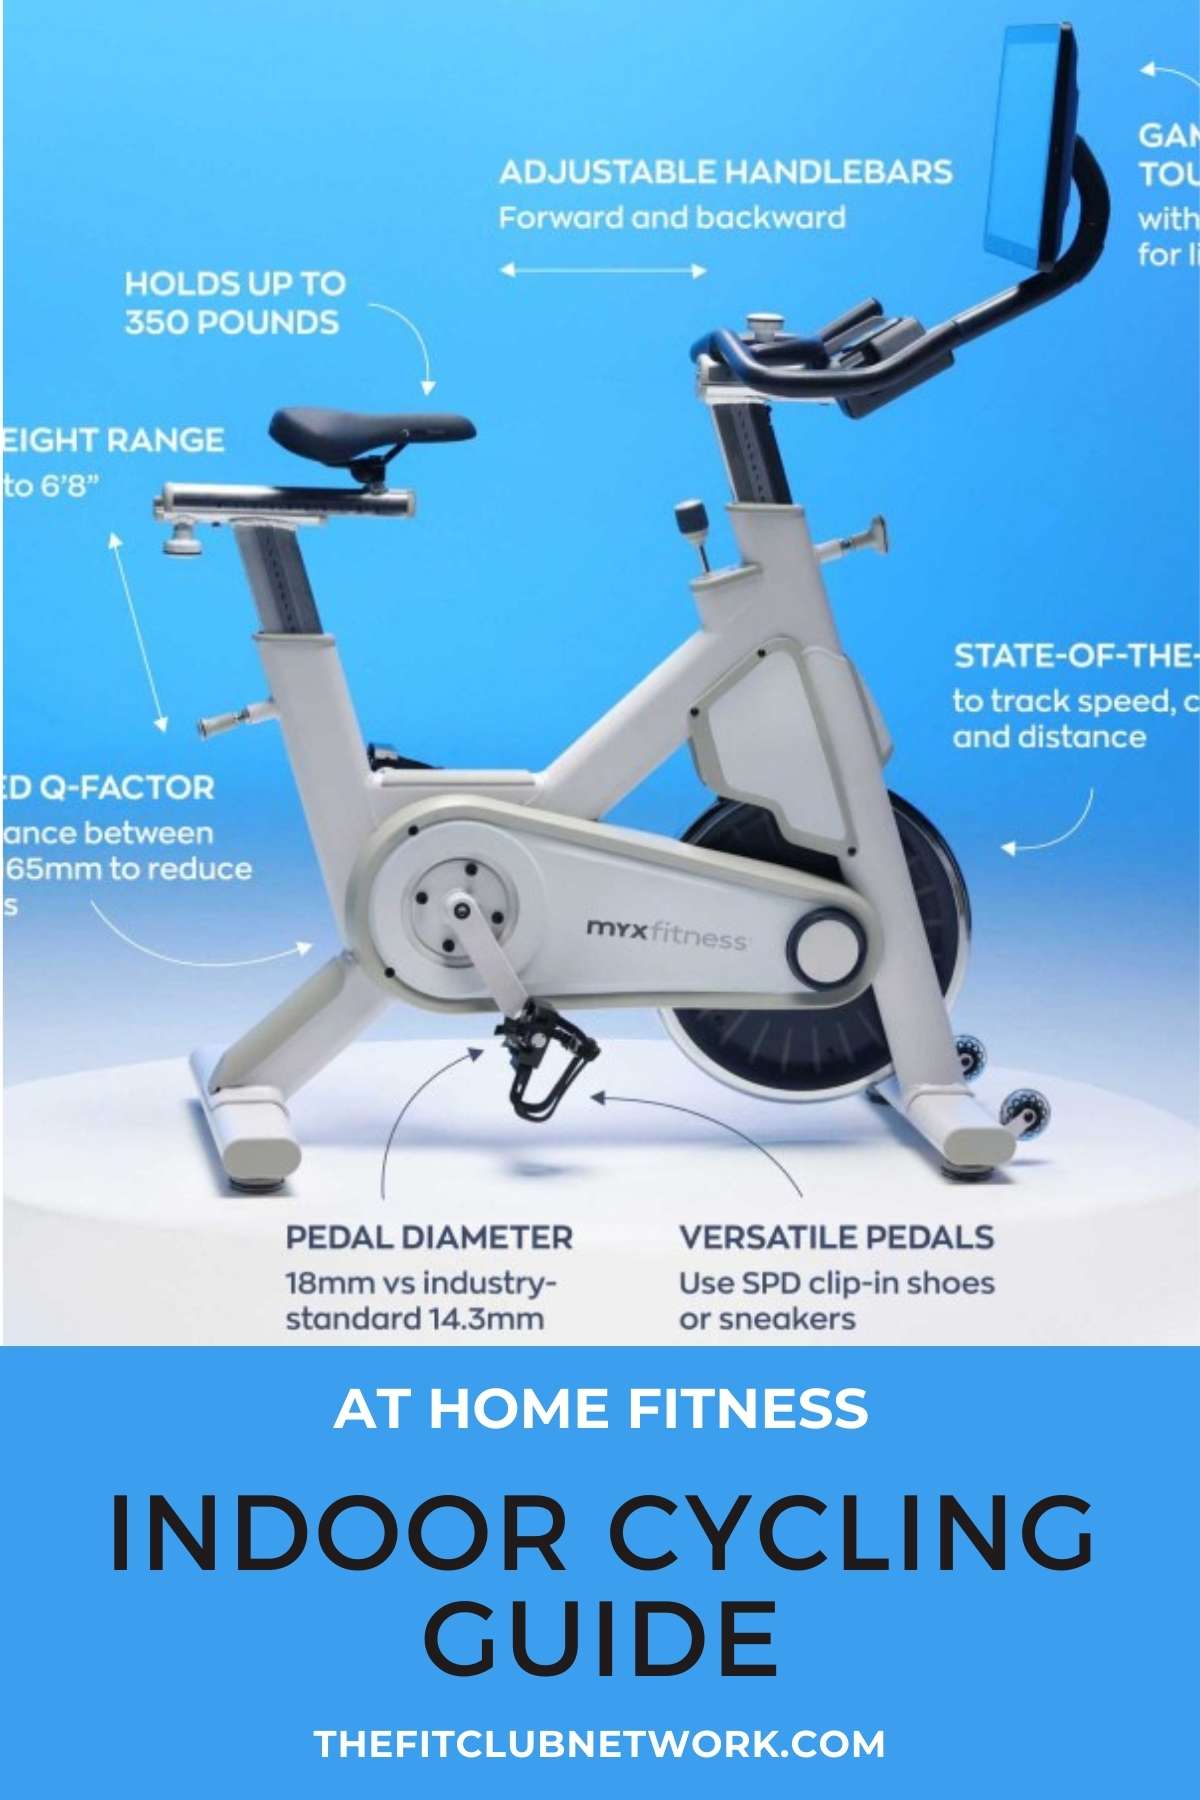 New to Indoor Cycling? Check Out Our Indoor Cycling Guide | THEFITCLUBNETWORK.COM